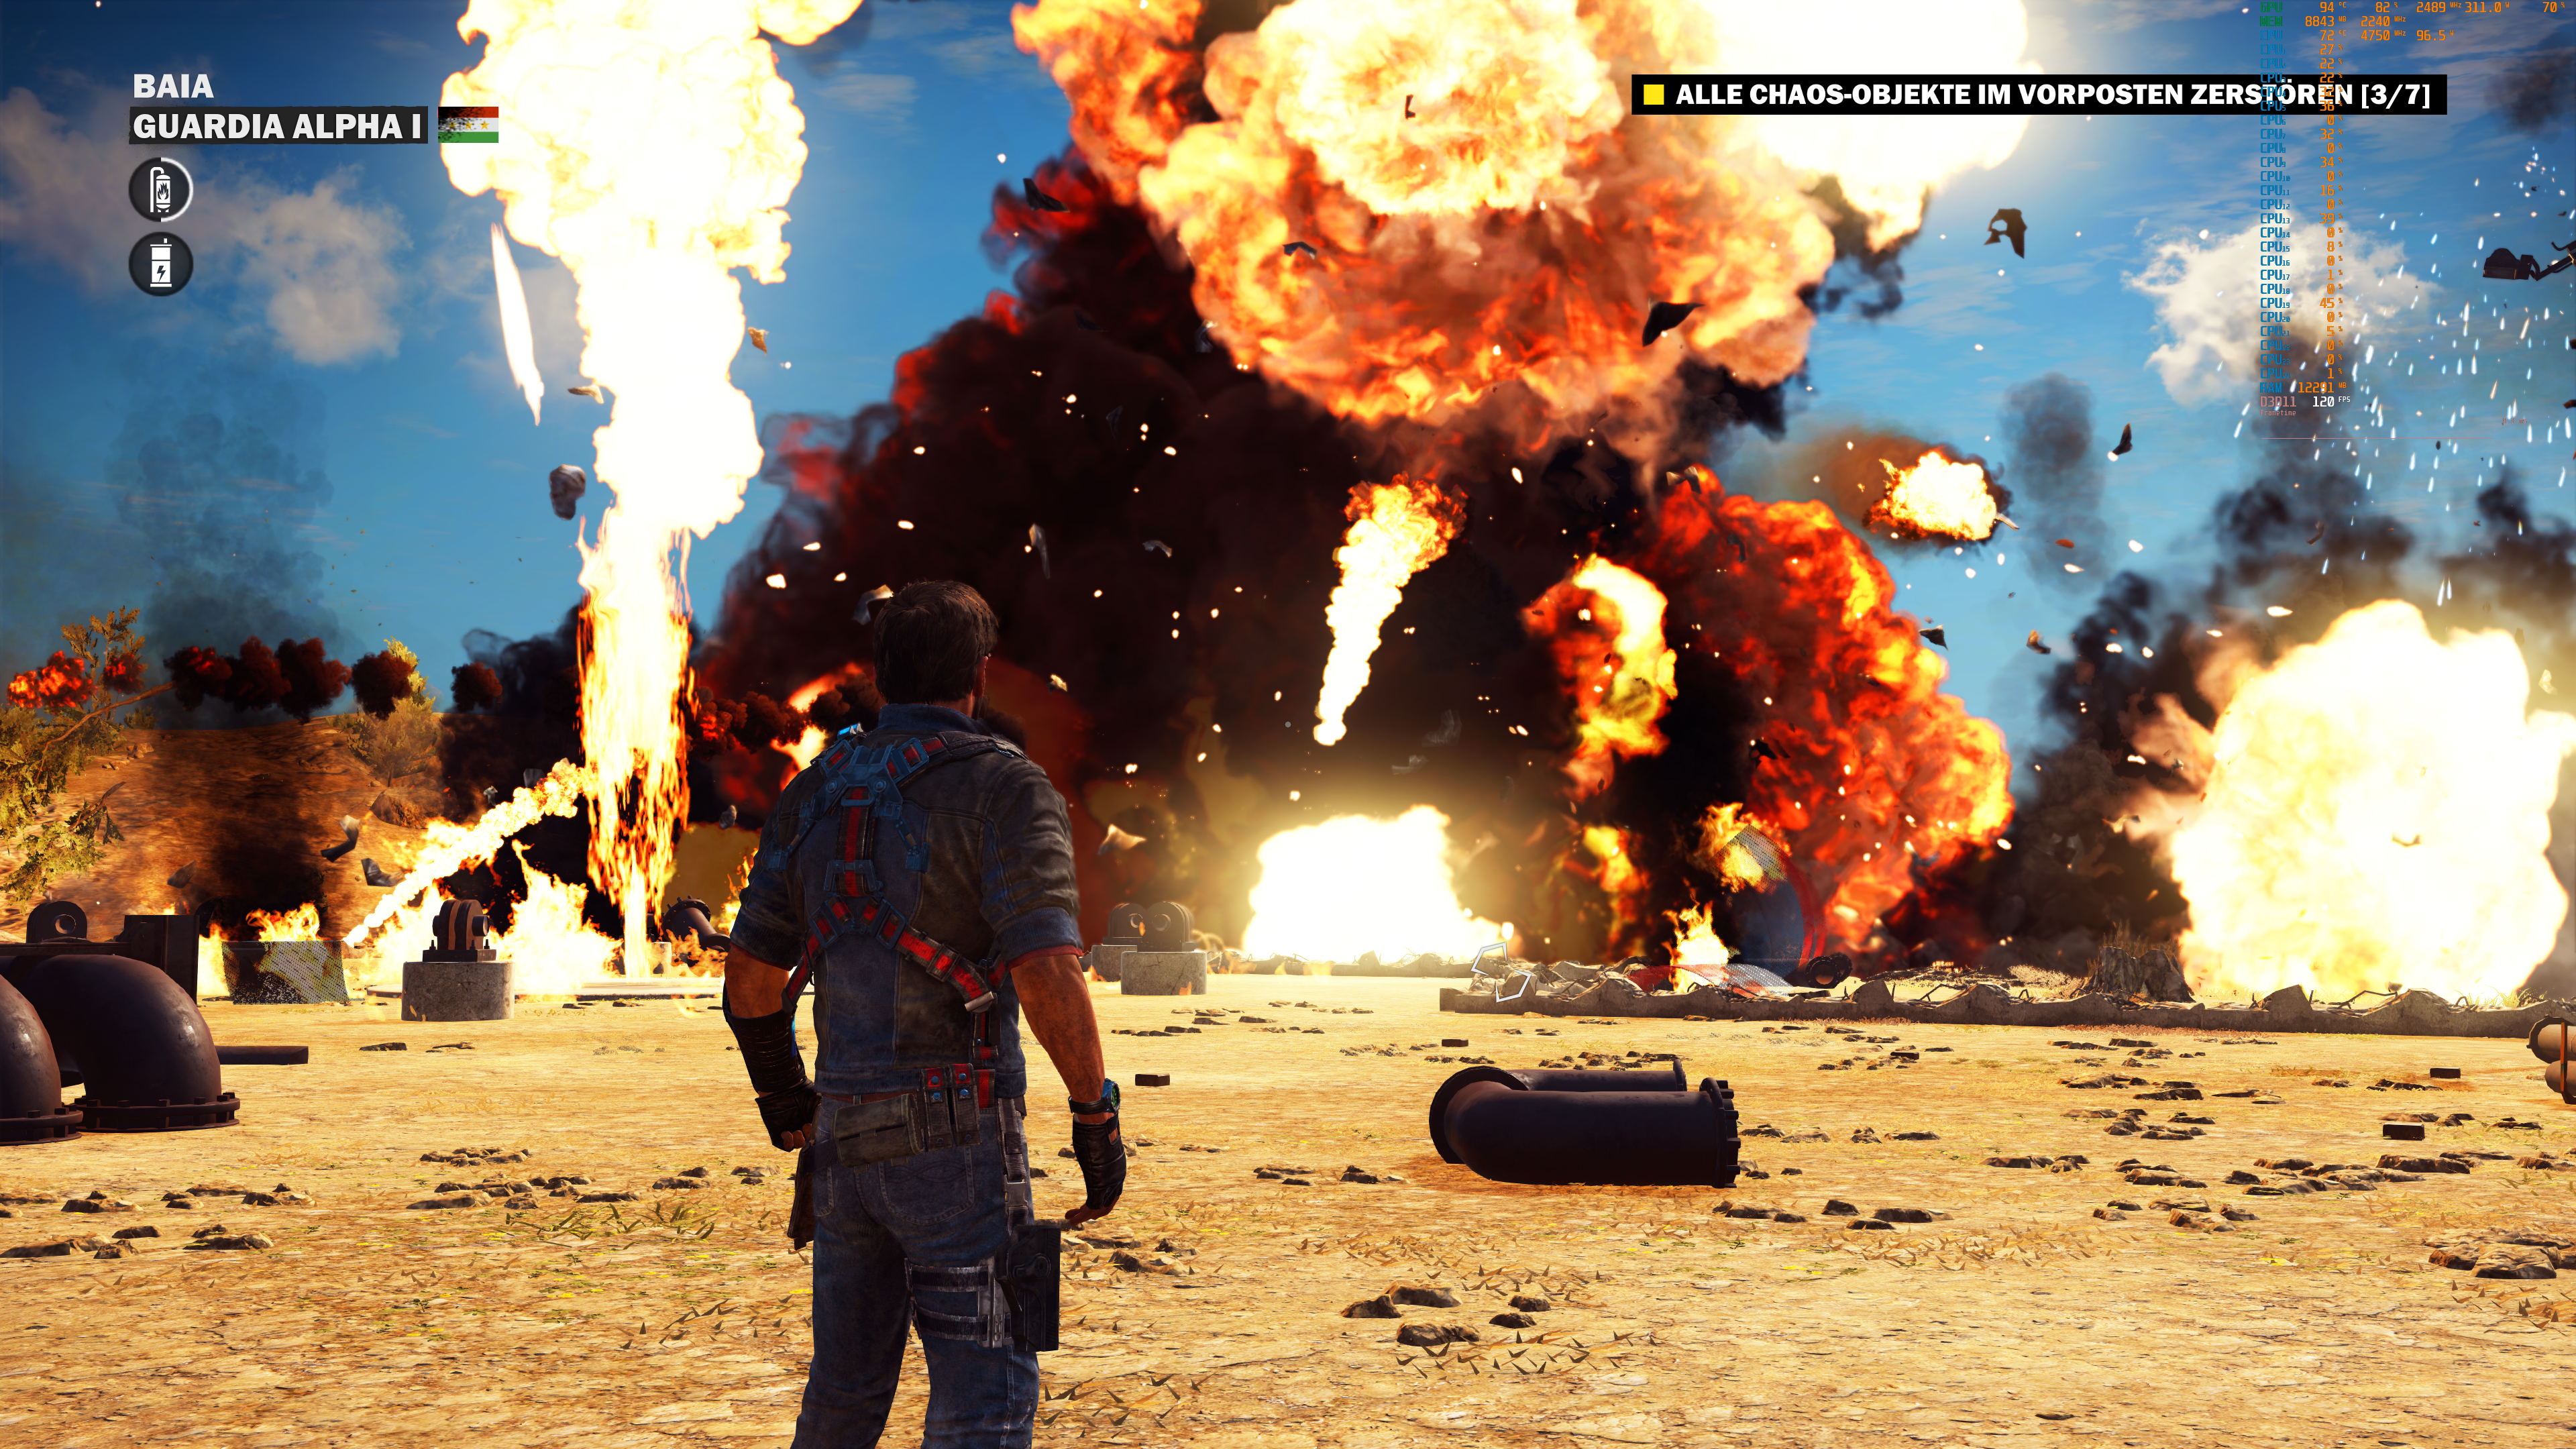 justcause3_2023_07_21e9cx3.png